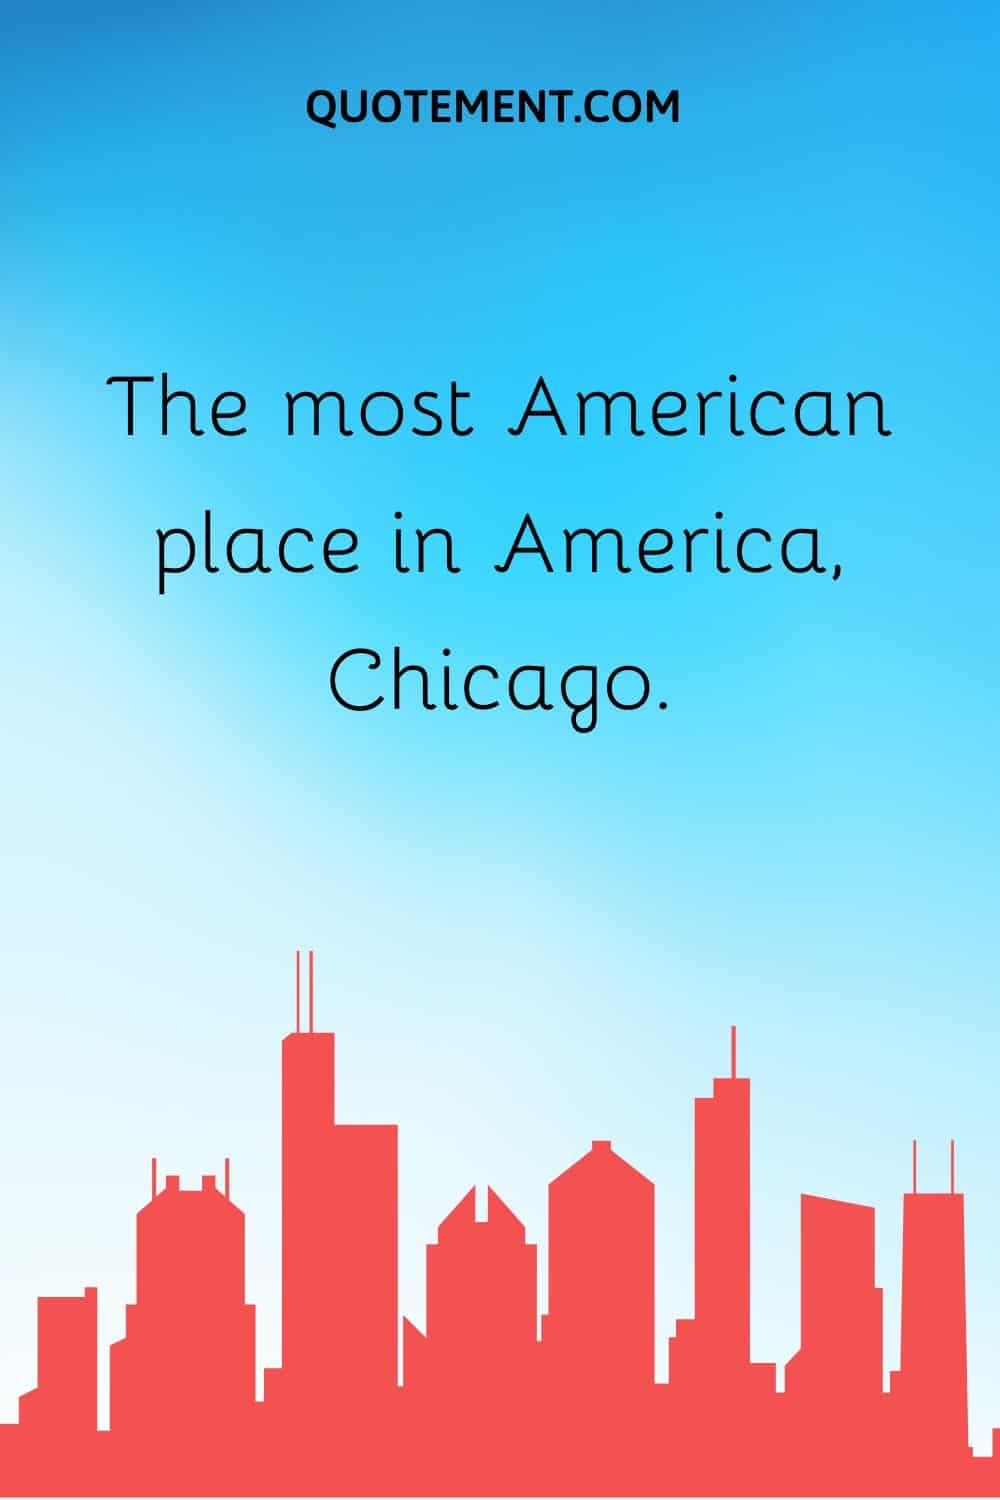 The most American place in America, Chicago.